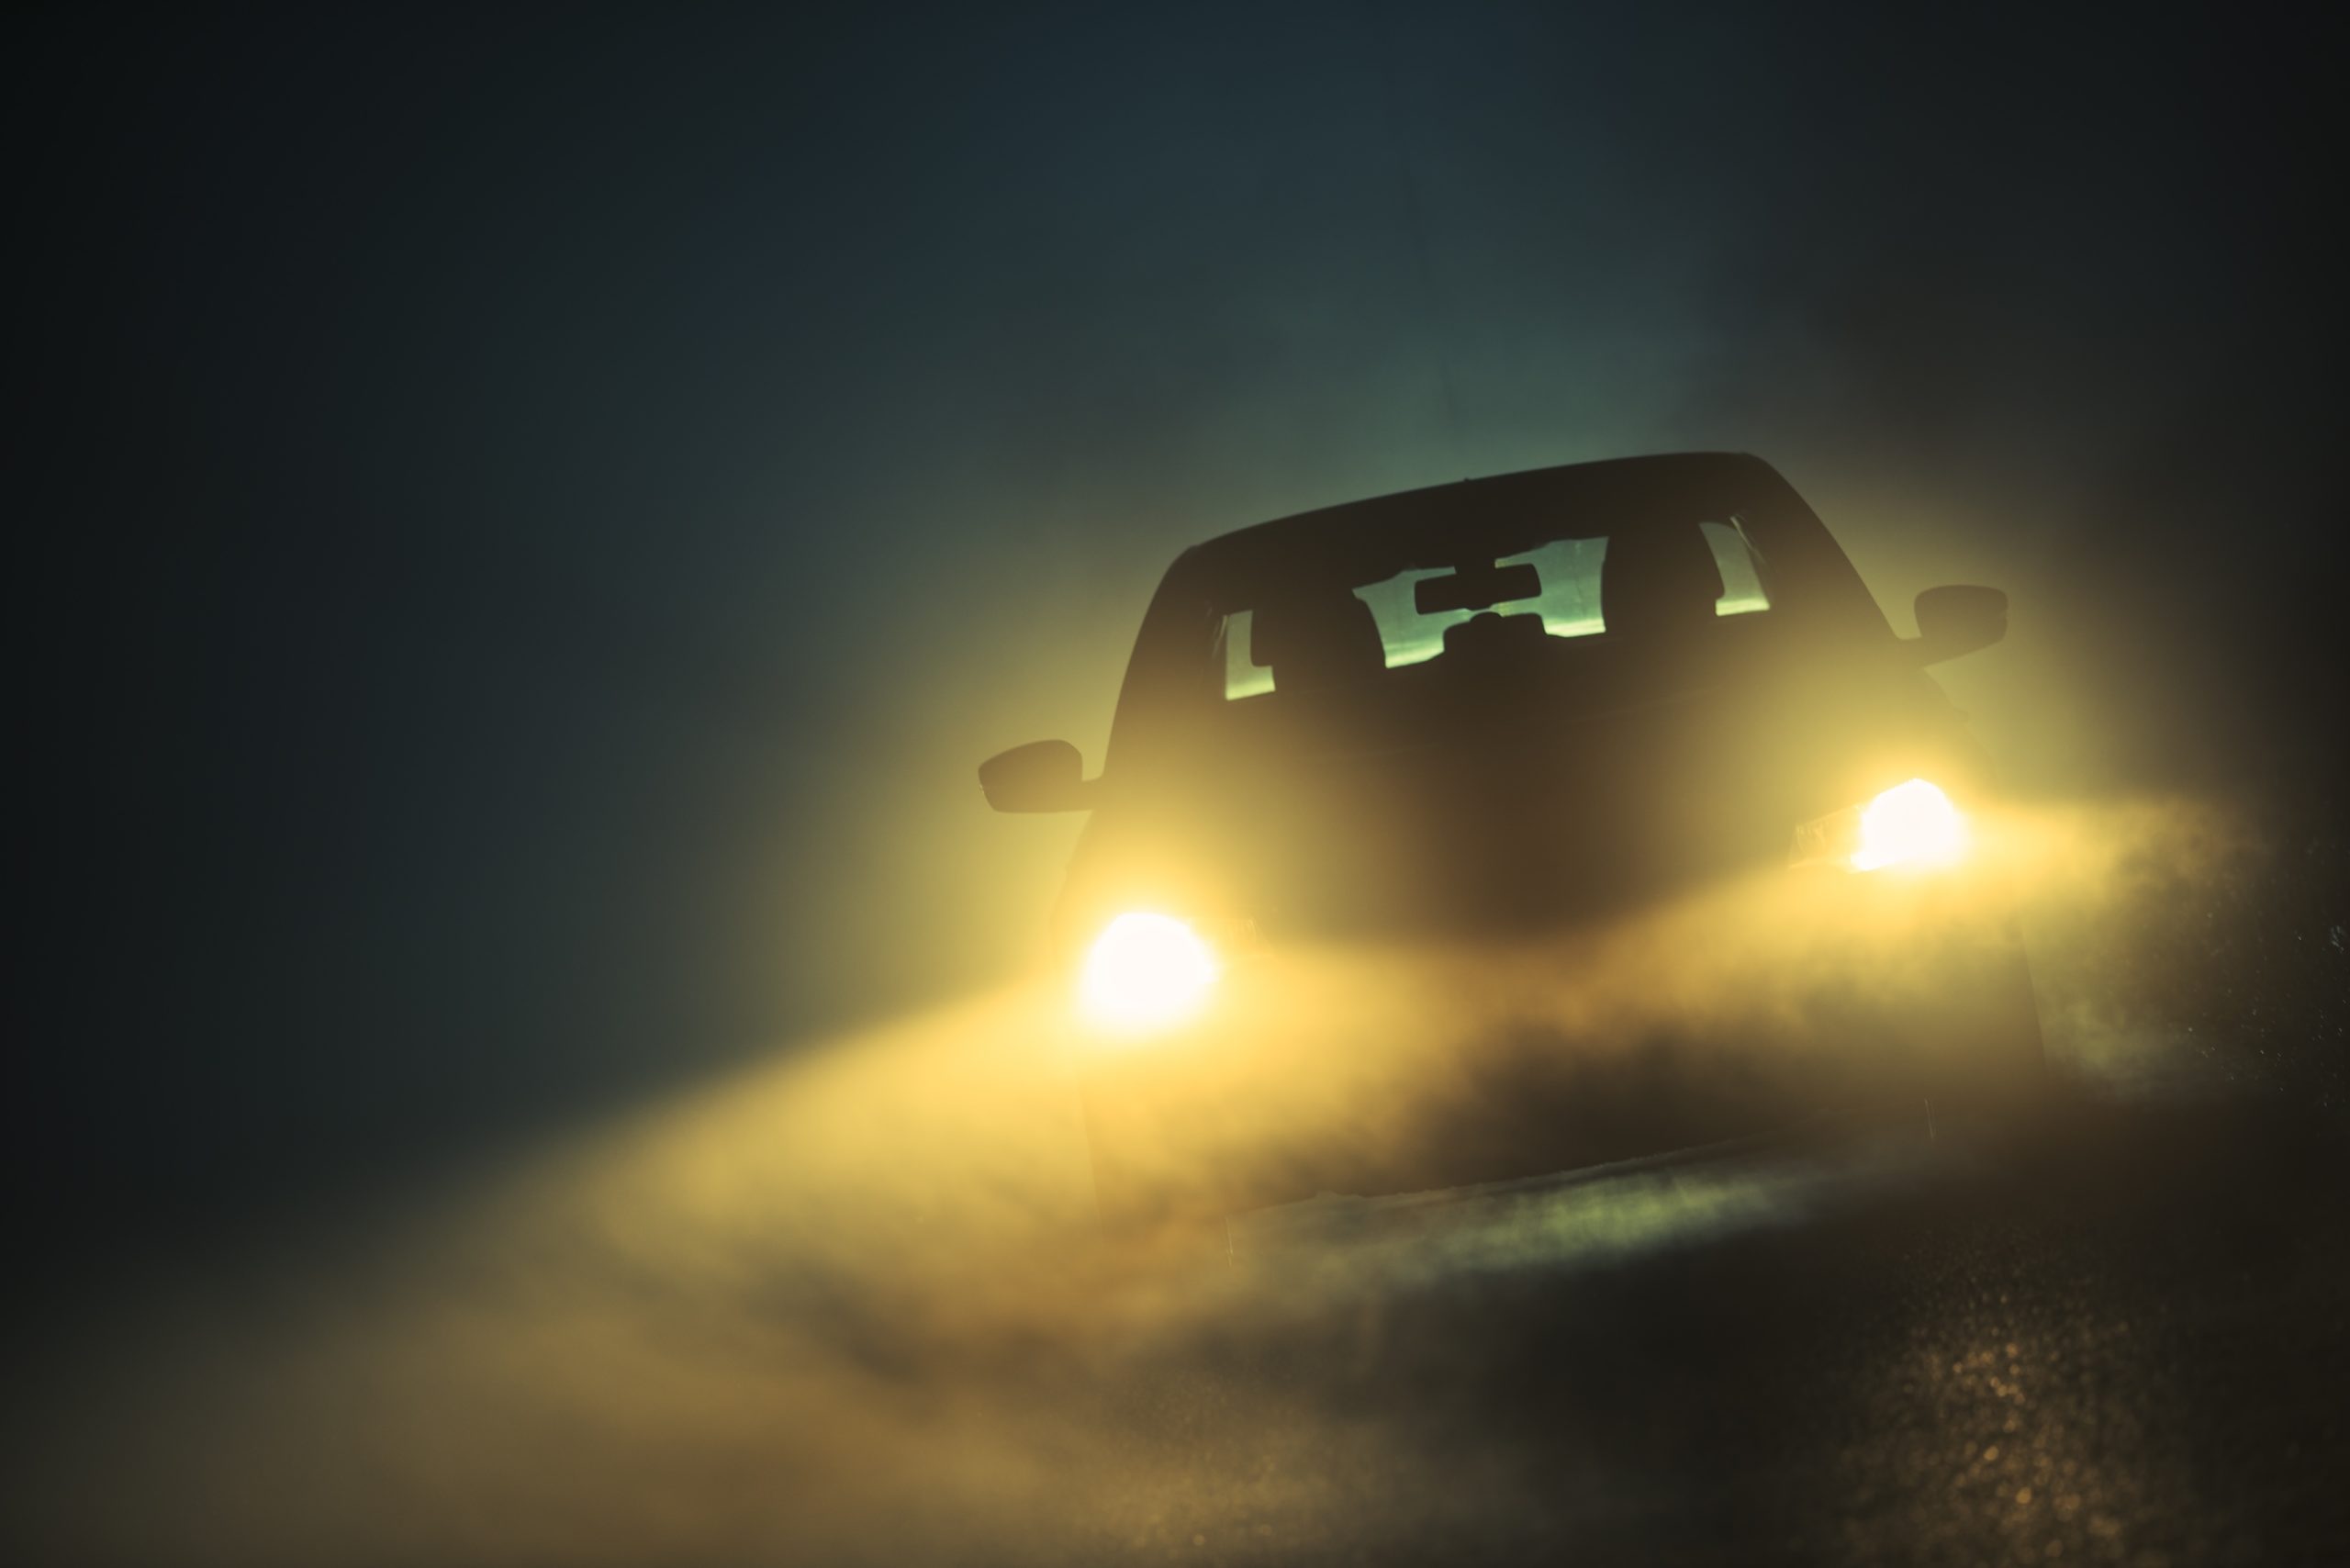 accidents in dense fog: how to protect yourself